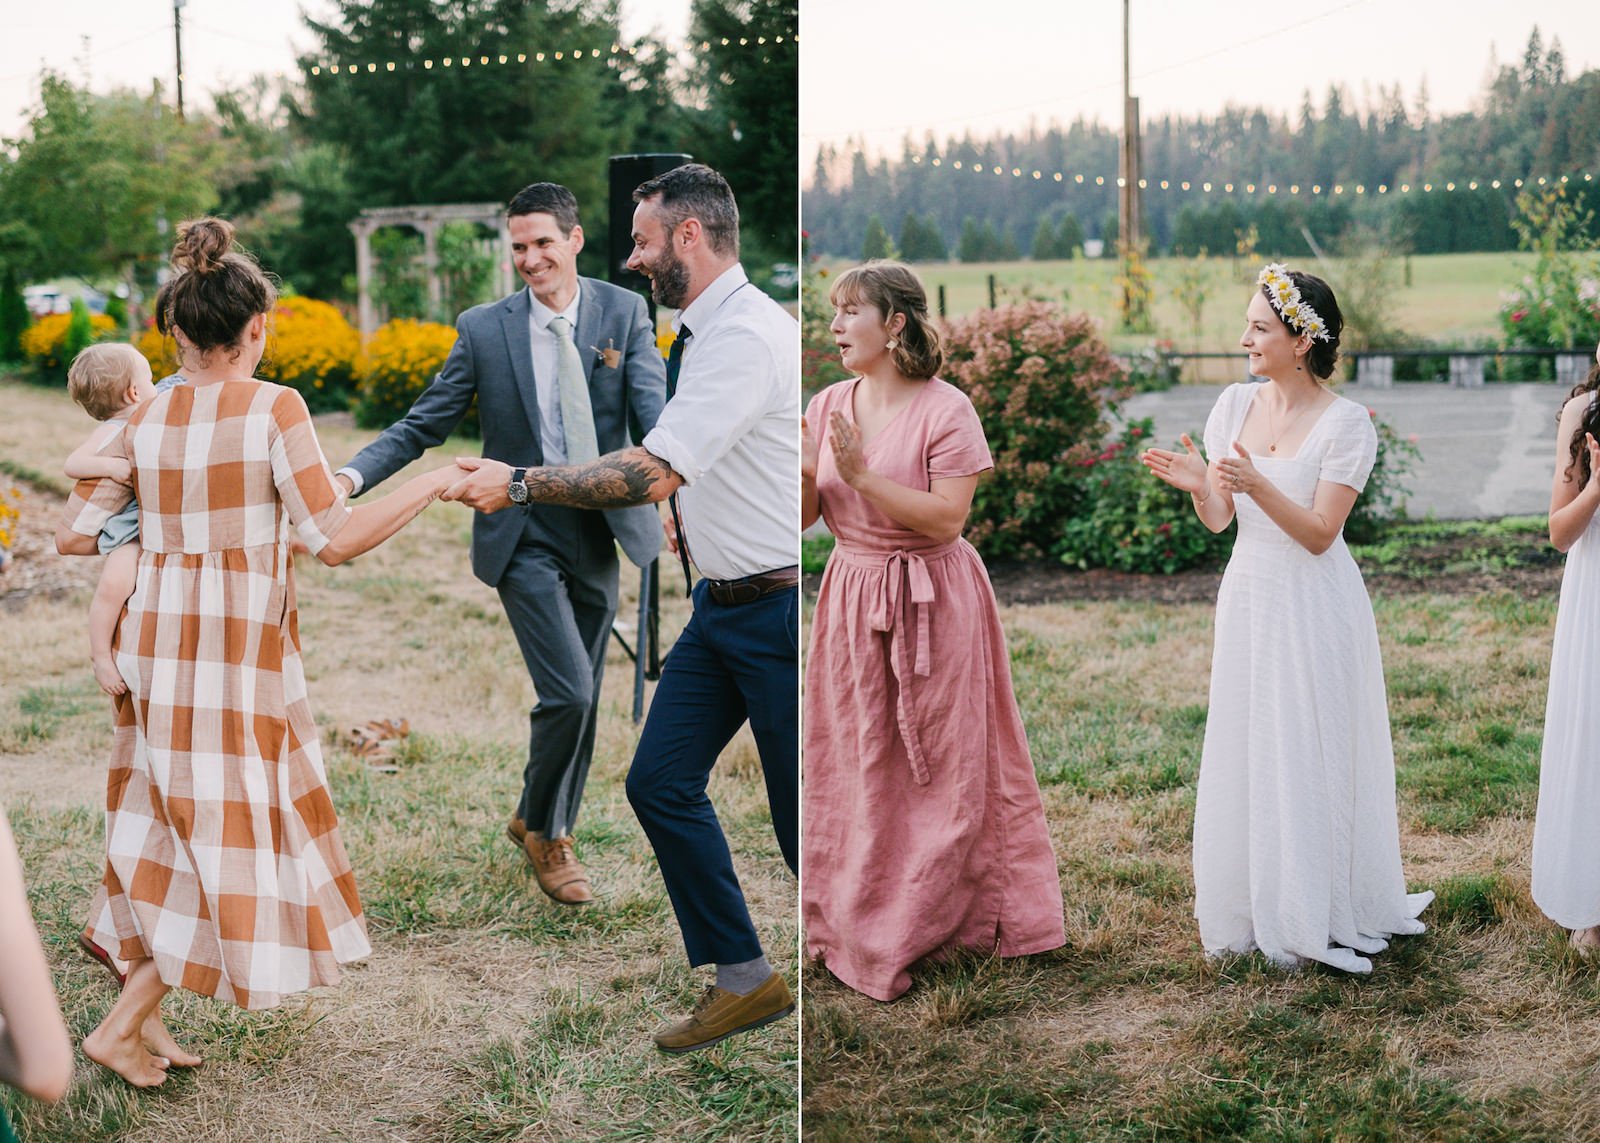  Bride claps while guests twirl in English dancing 